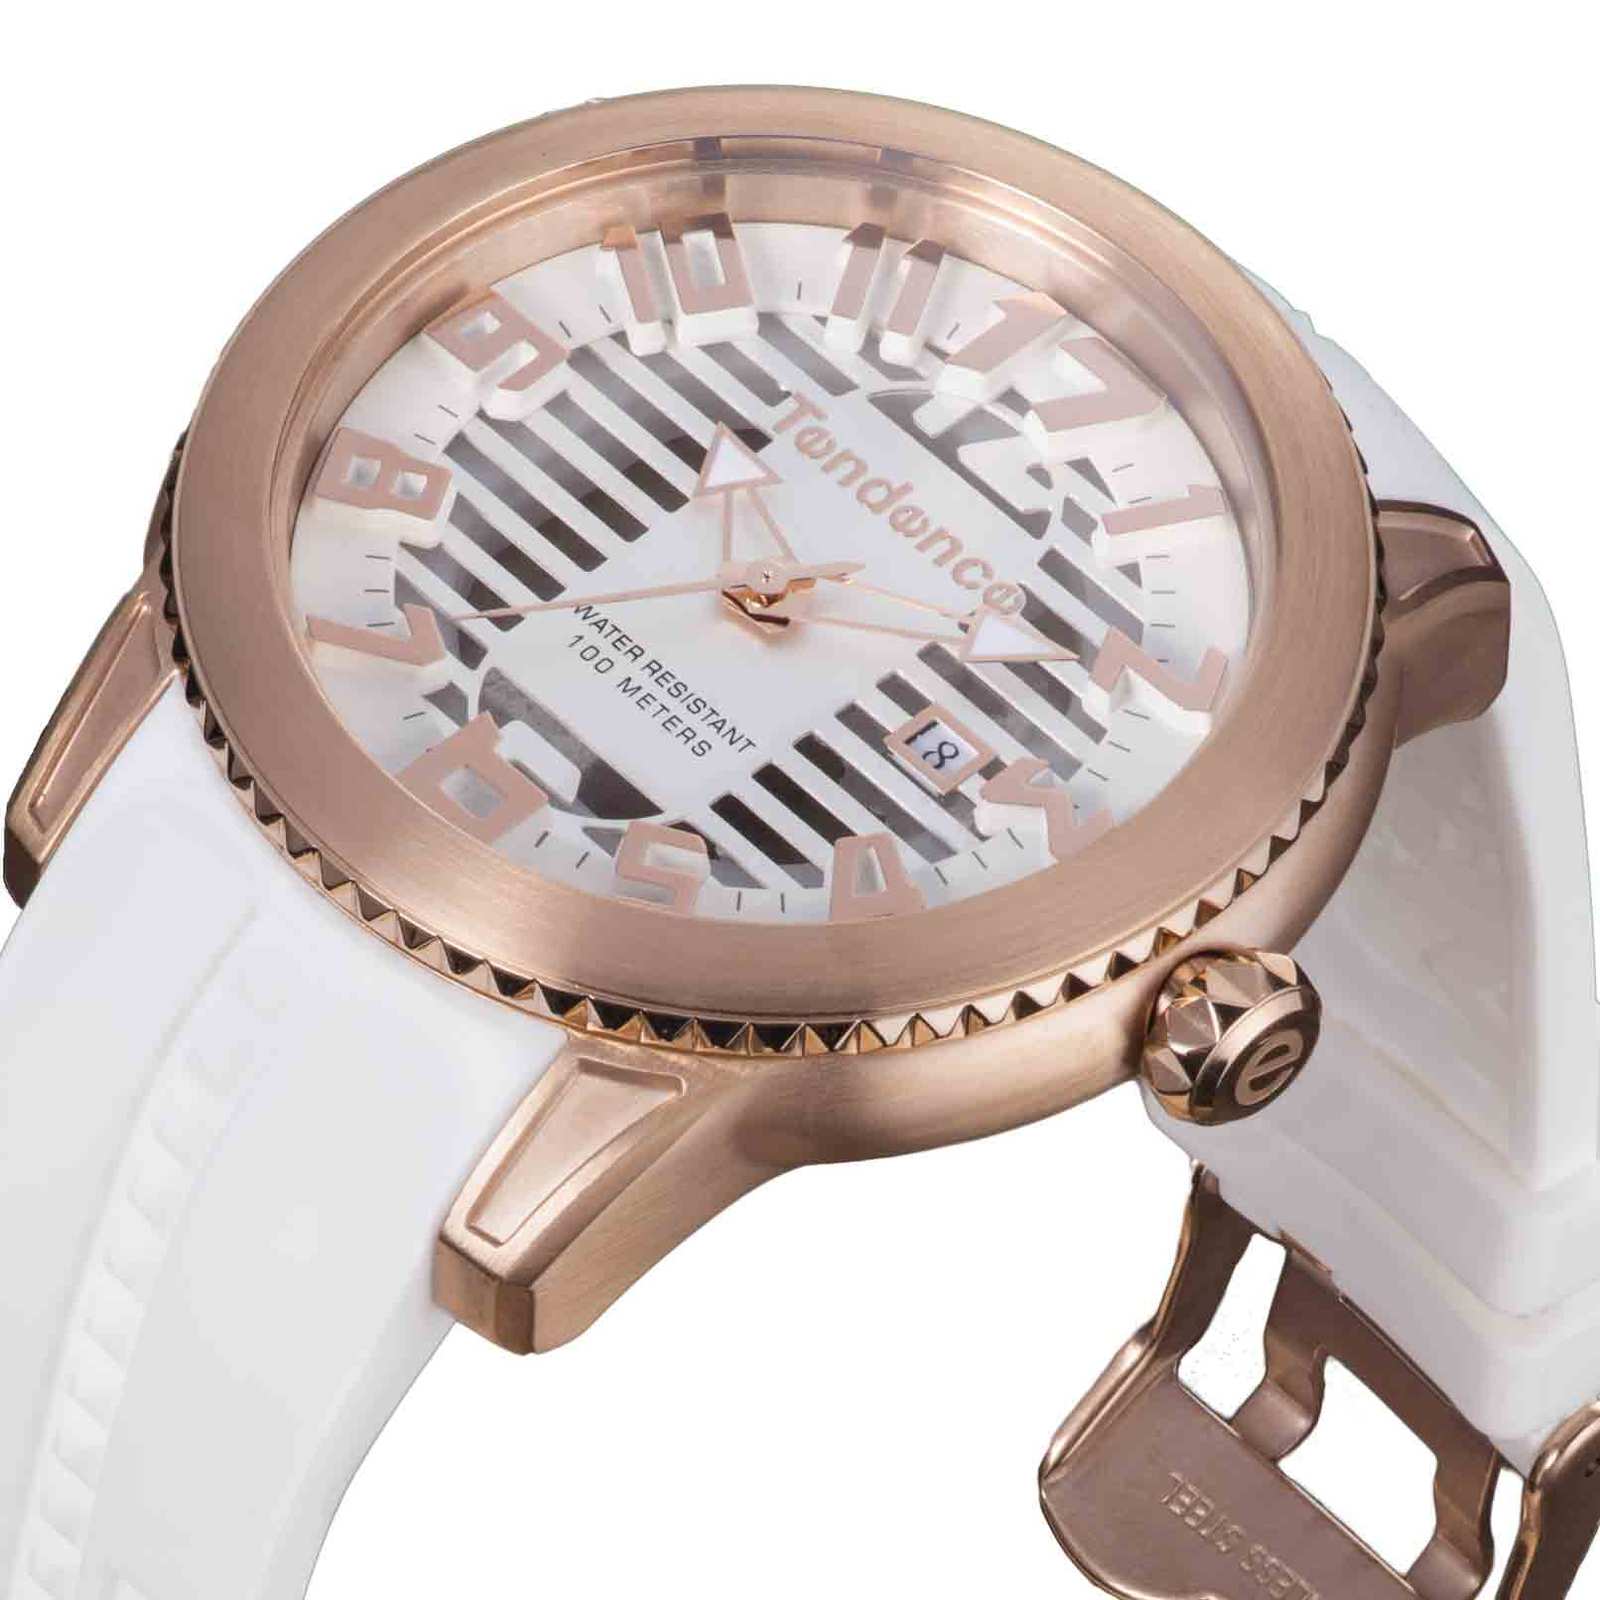 Tendence Watches Glam 47 White with Full Stones